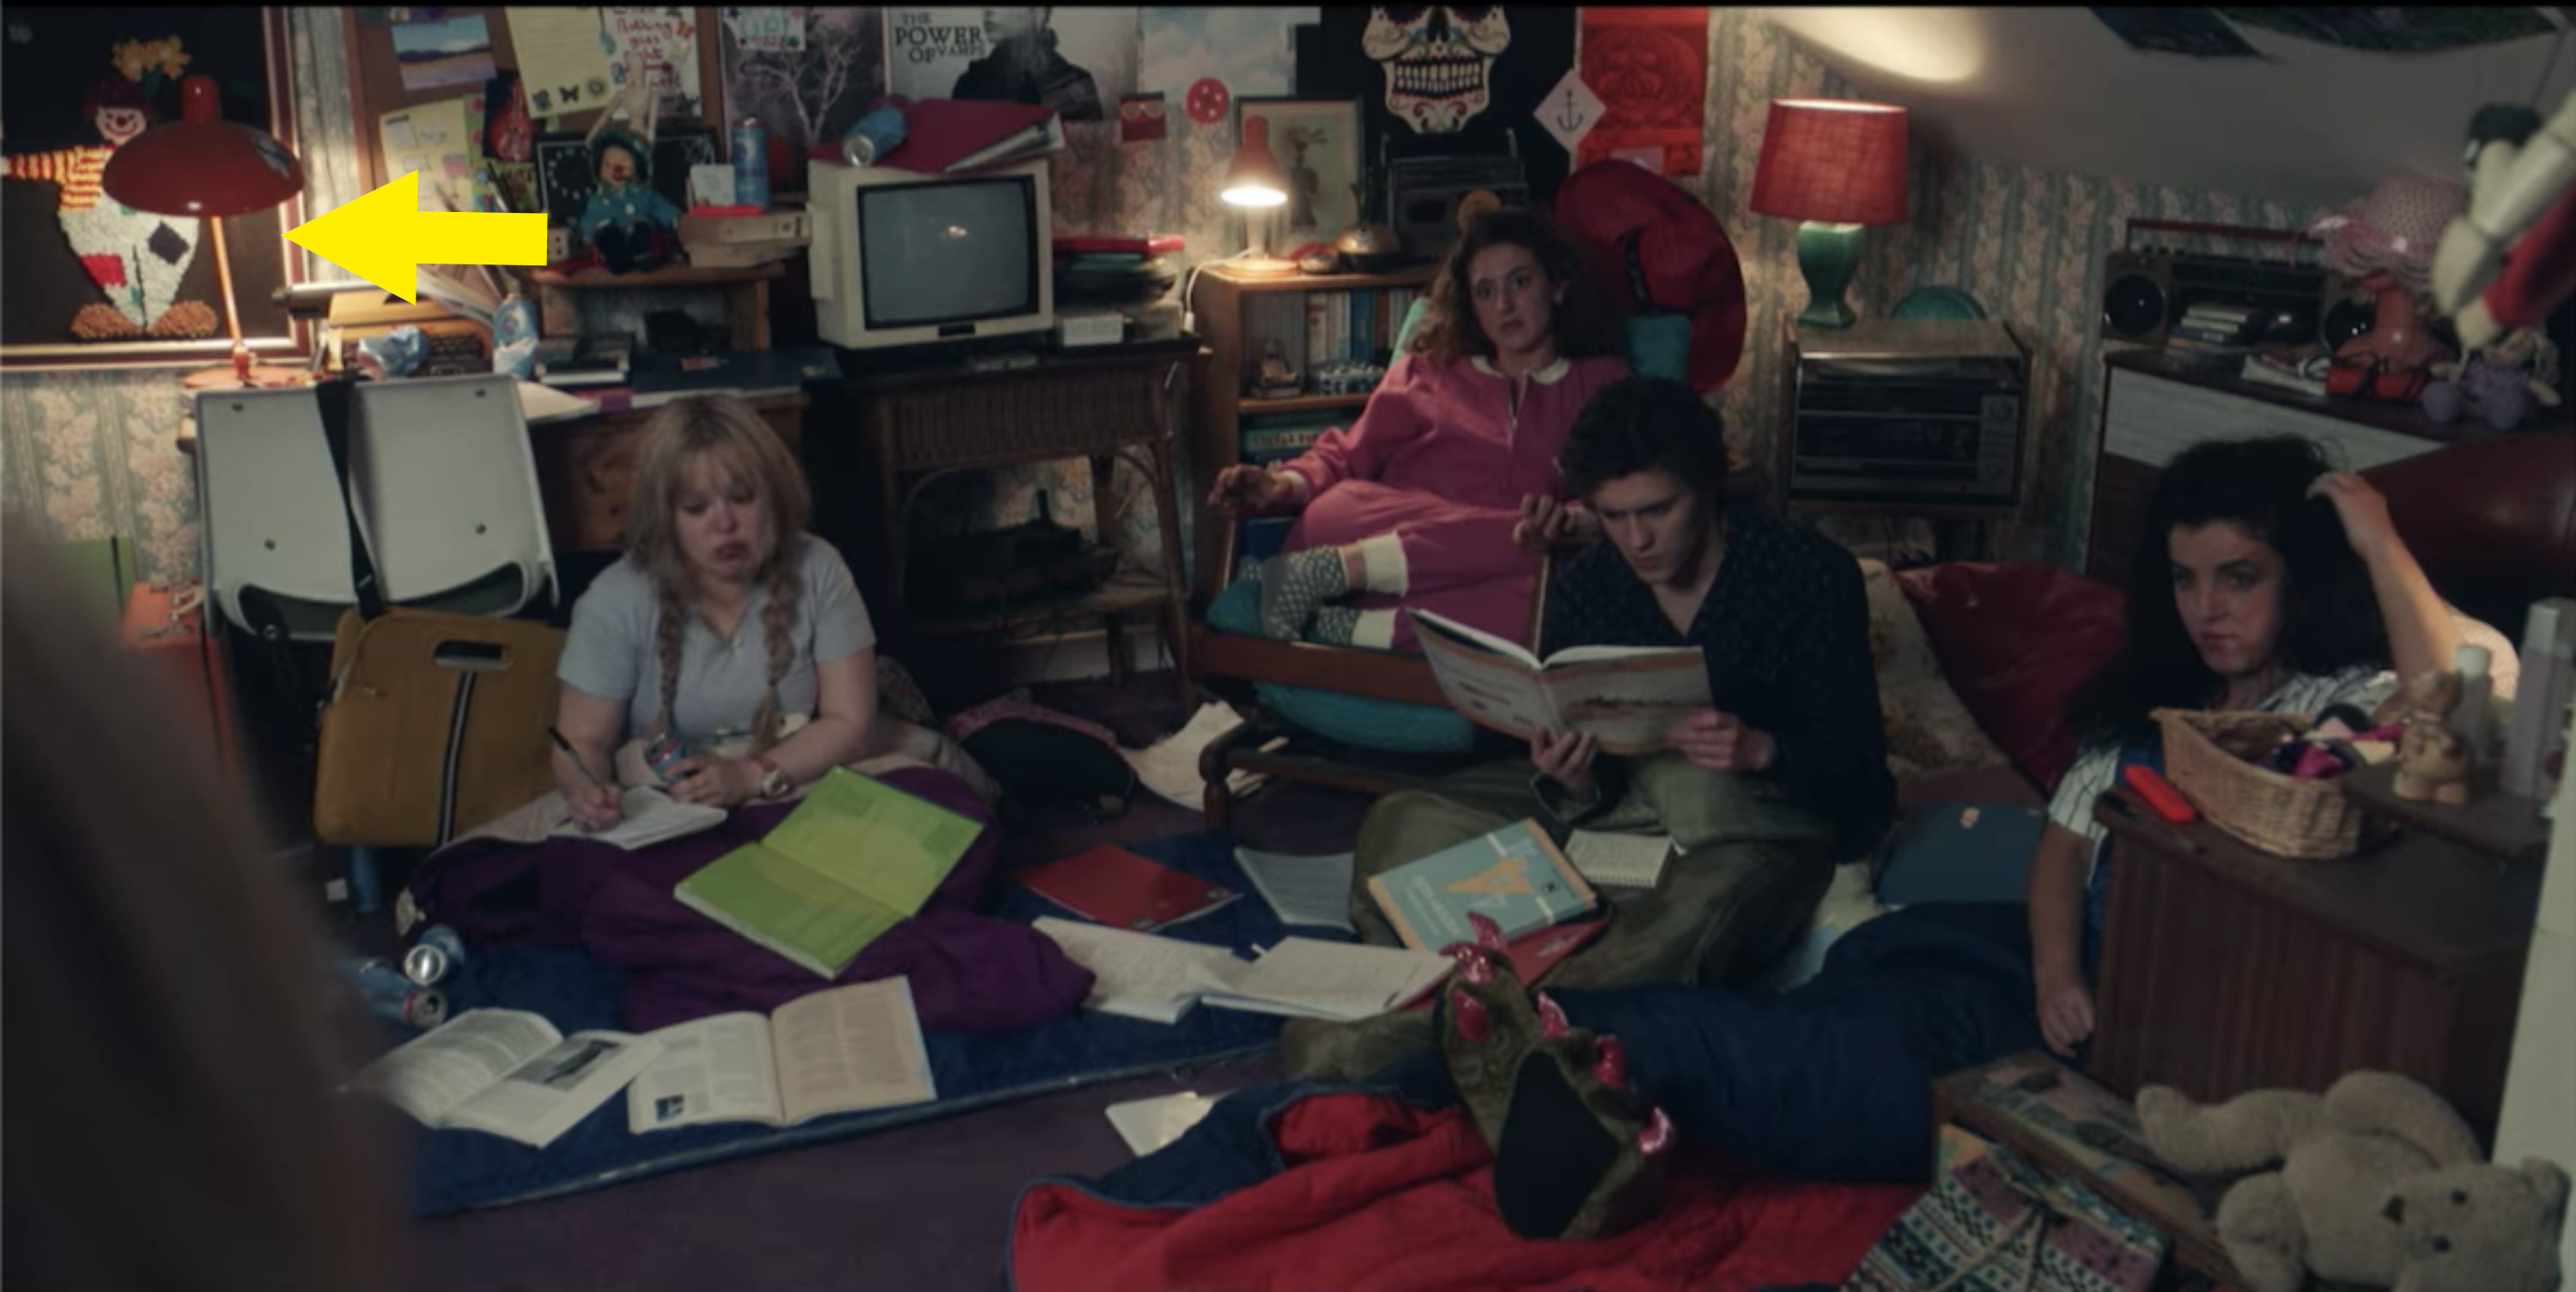 The derry girls studying in Erin&#x27;s room